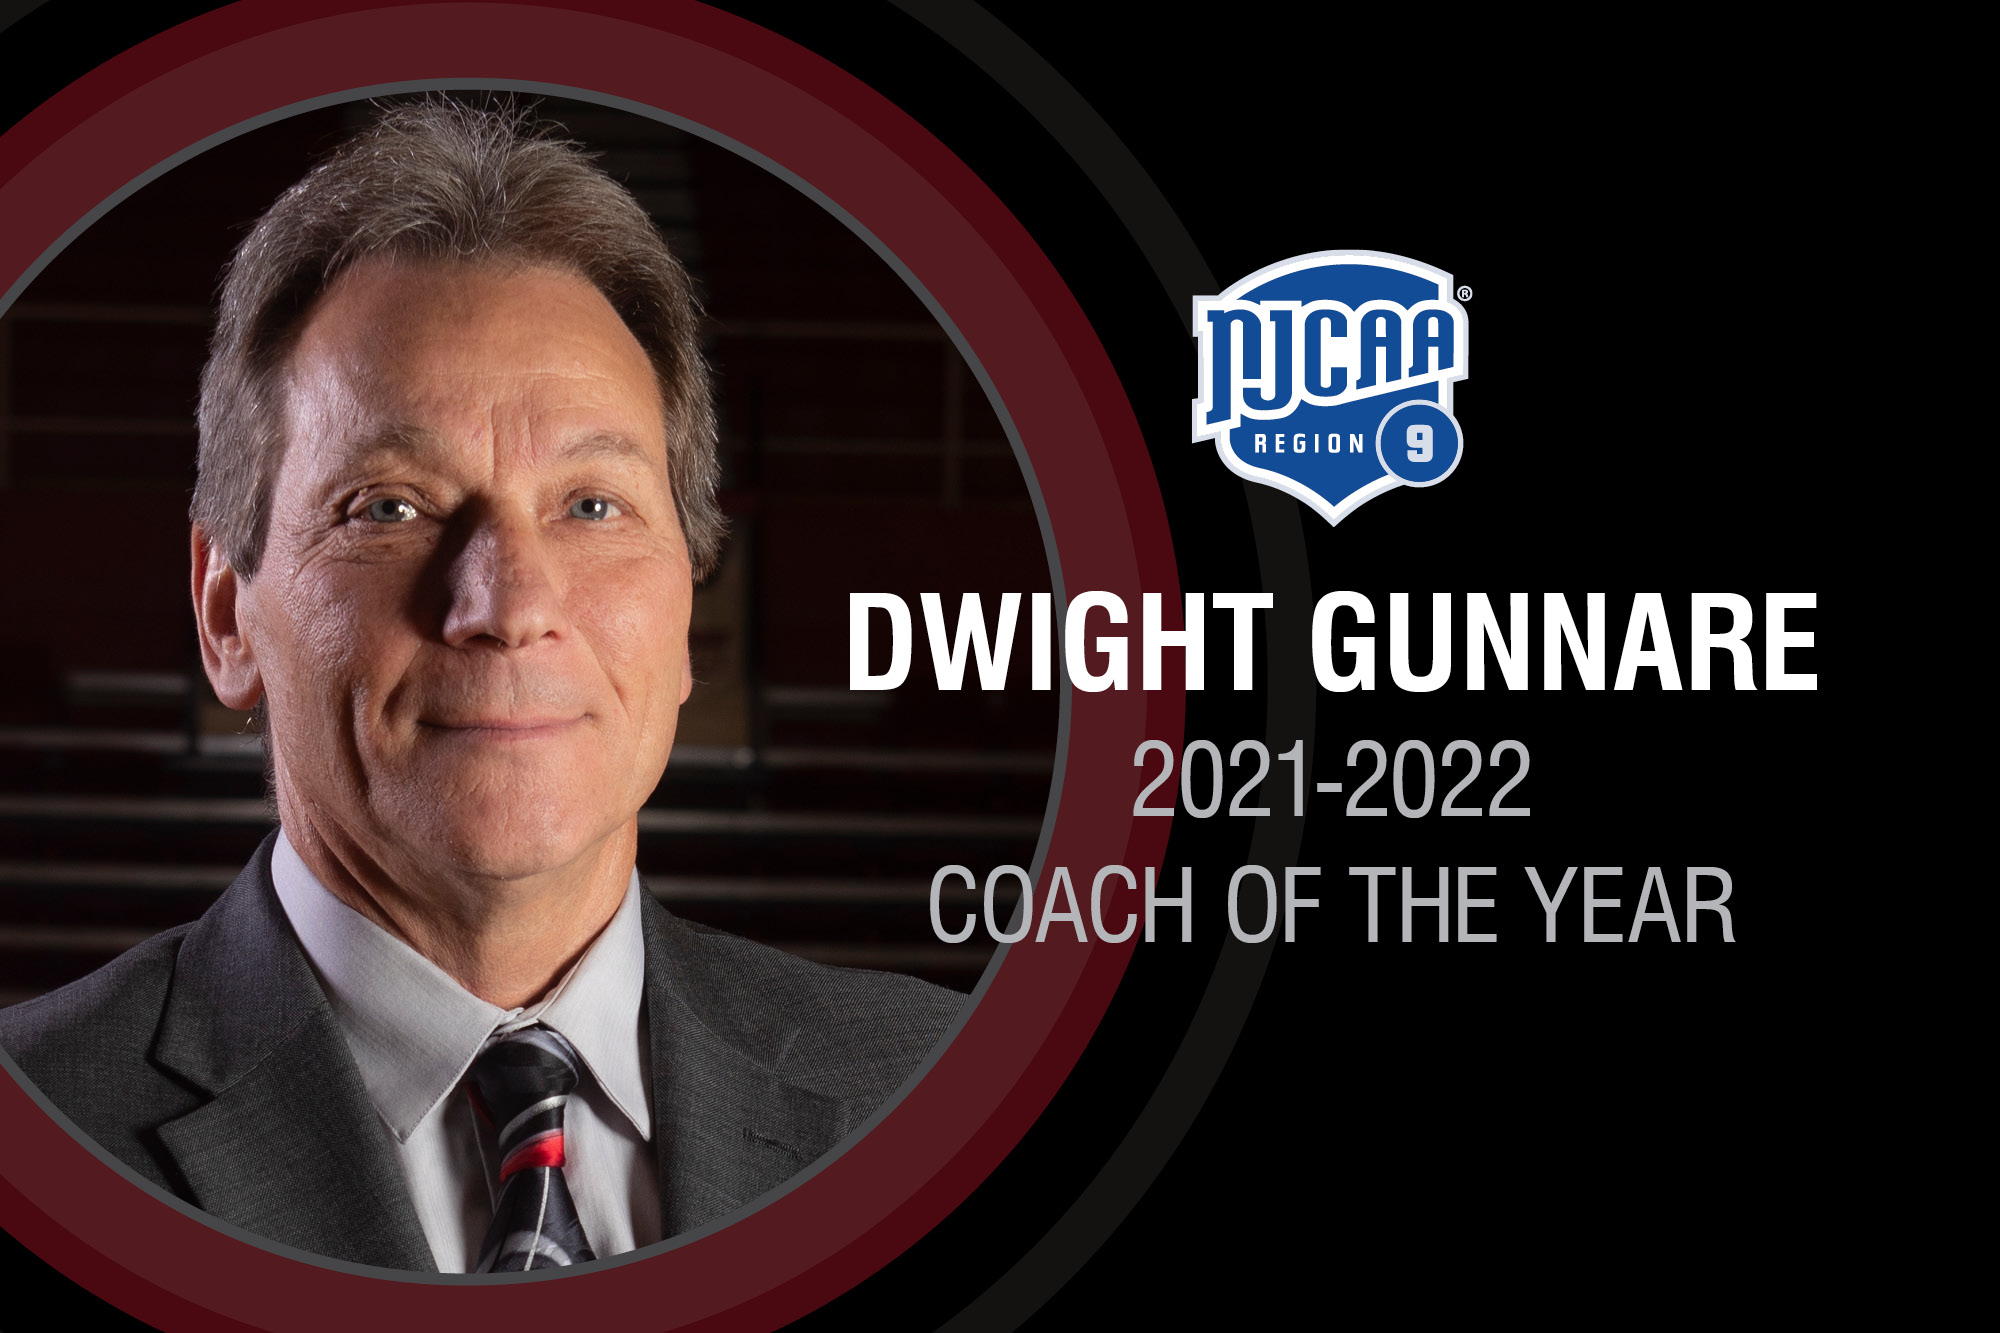 Image for Dwight Gunnare named 2021-2022 Coach of the Year.